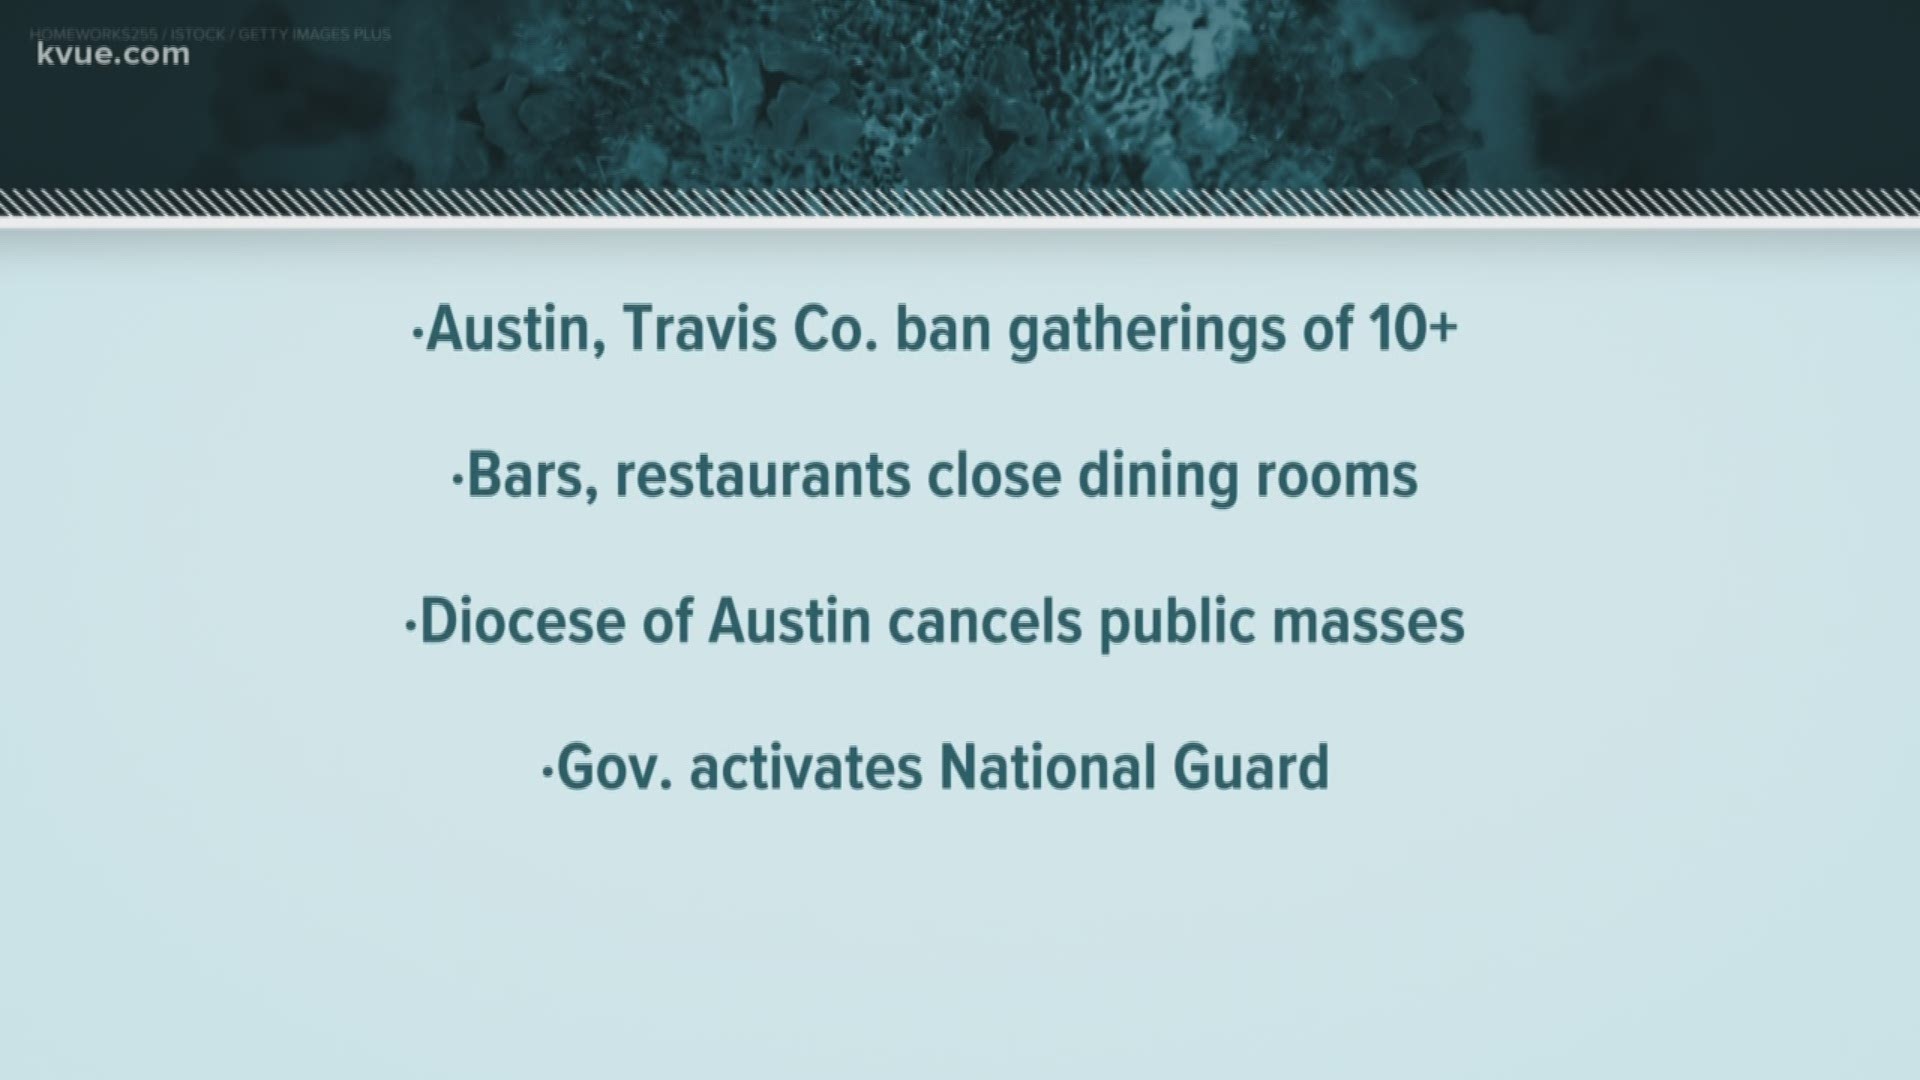 On Tuesday, Austin and Travis County announced gatherings with more than 10 people are prohibited.